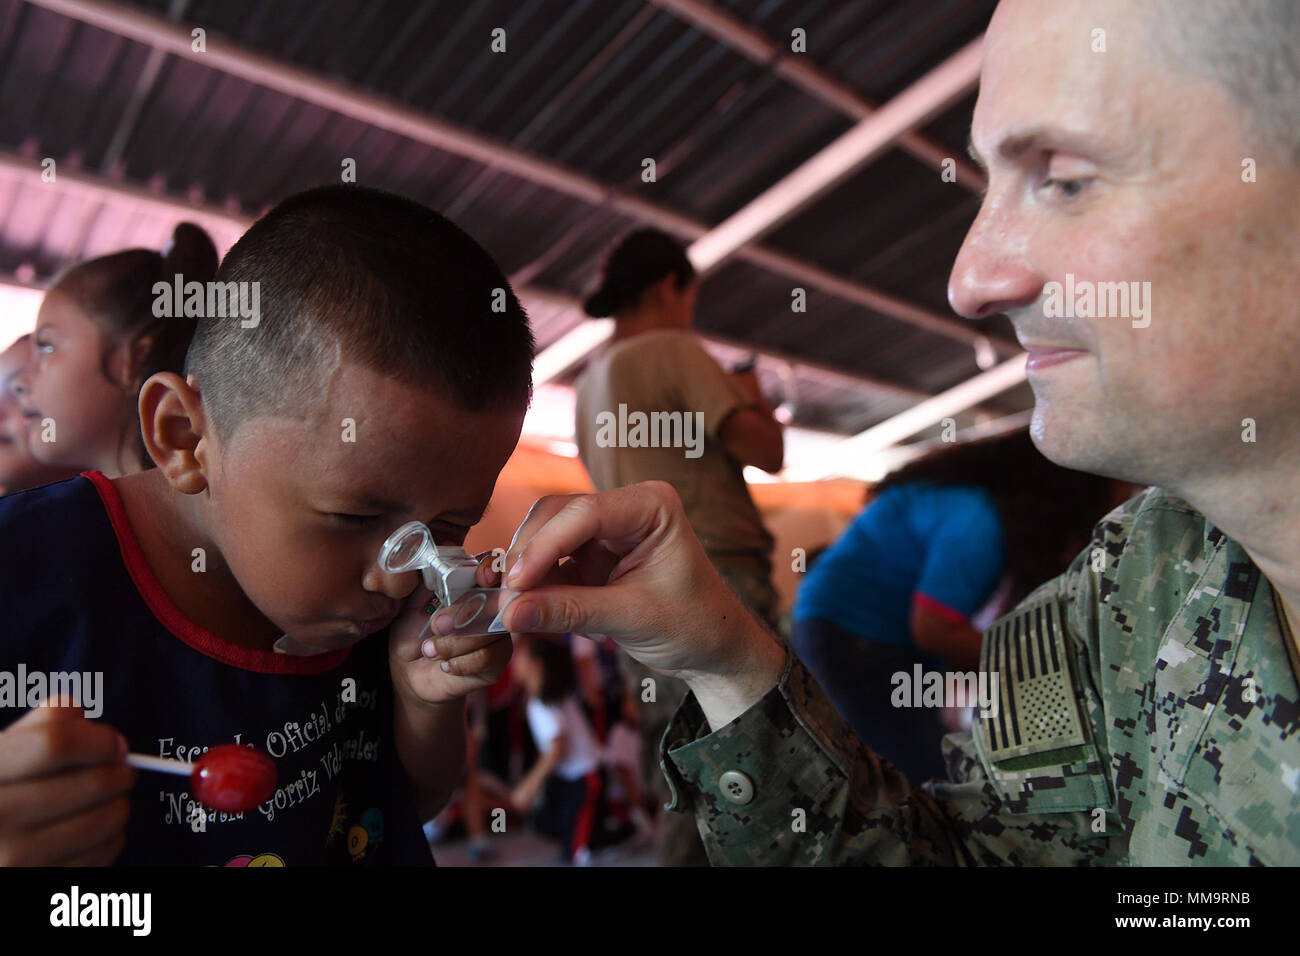 170922-N-BK435-0540 PUERTO BARRIOS, Guatemala (Sept. 22, 2017) Lt. Cmdr. Ian Sutherland, technical director for the Navy Entomology Center of Excellence, shows a student a mosquito specimen at Escuela Natalia Corriz Viuda de Morales, a Guatemalan primary school, during a Southern Partnership Station 17 community relations project (COMREL). SPS 17 is a U.S. Navy deployment executed by U.S. Naval Forces Southern Command/U.S. 4th Fleet, focused on subject matter expert exchanges with partner nation militaries and security forces in Central and South America. (U.S. Navy photo by Mass Communication Stock Photo